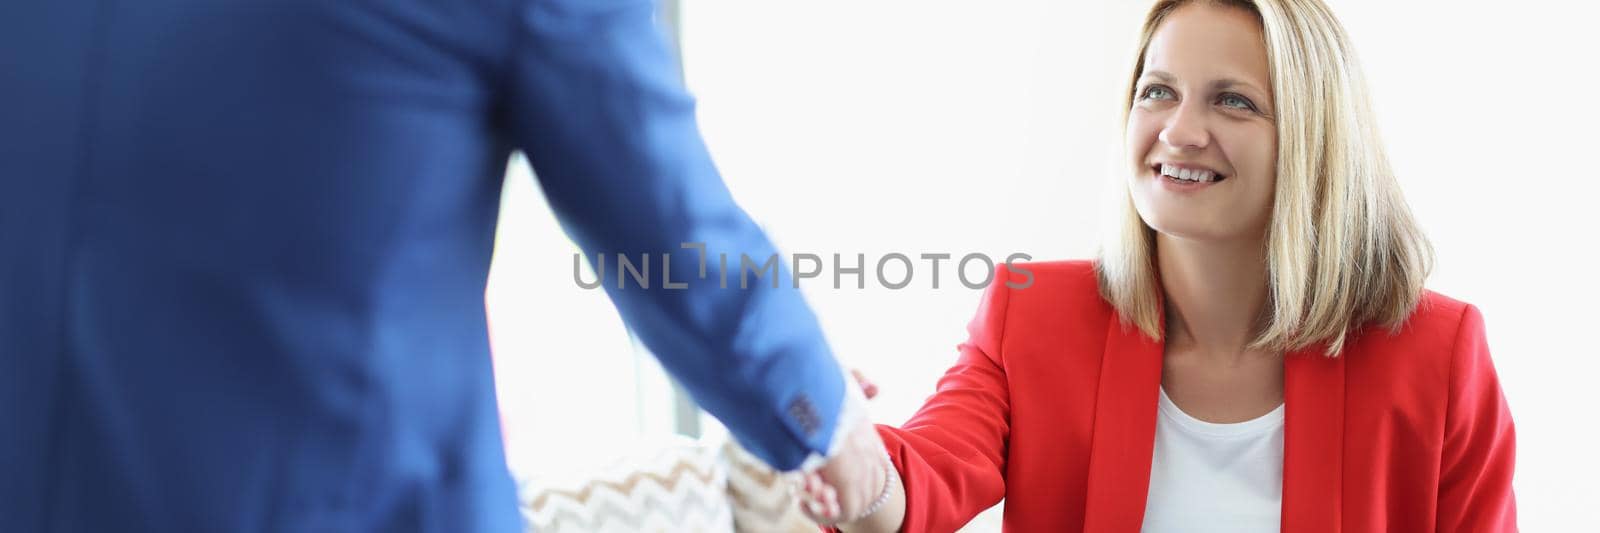 Portrait of cheerful blonde young lady greeting man with handshake sitting on sofa. Business meeting to discuss agreement. Deal, lunch time, career concept